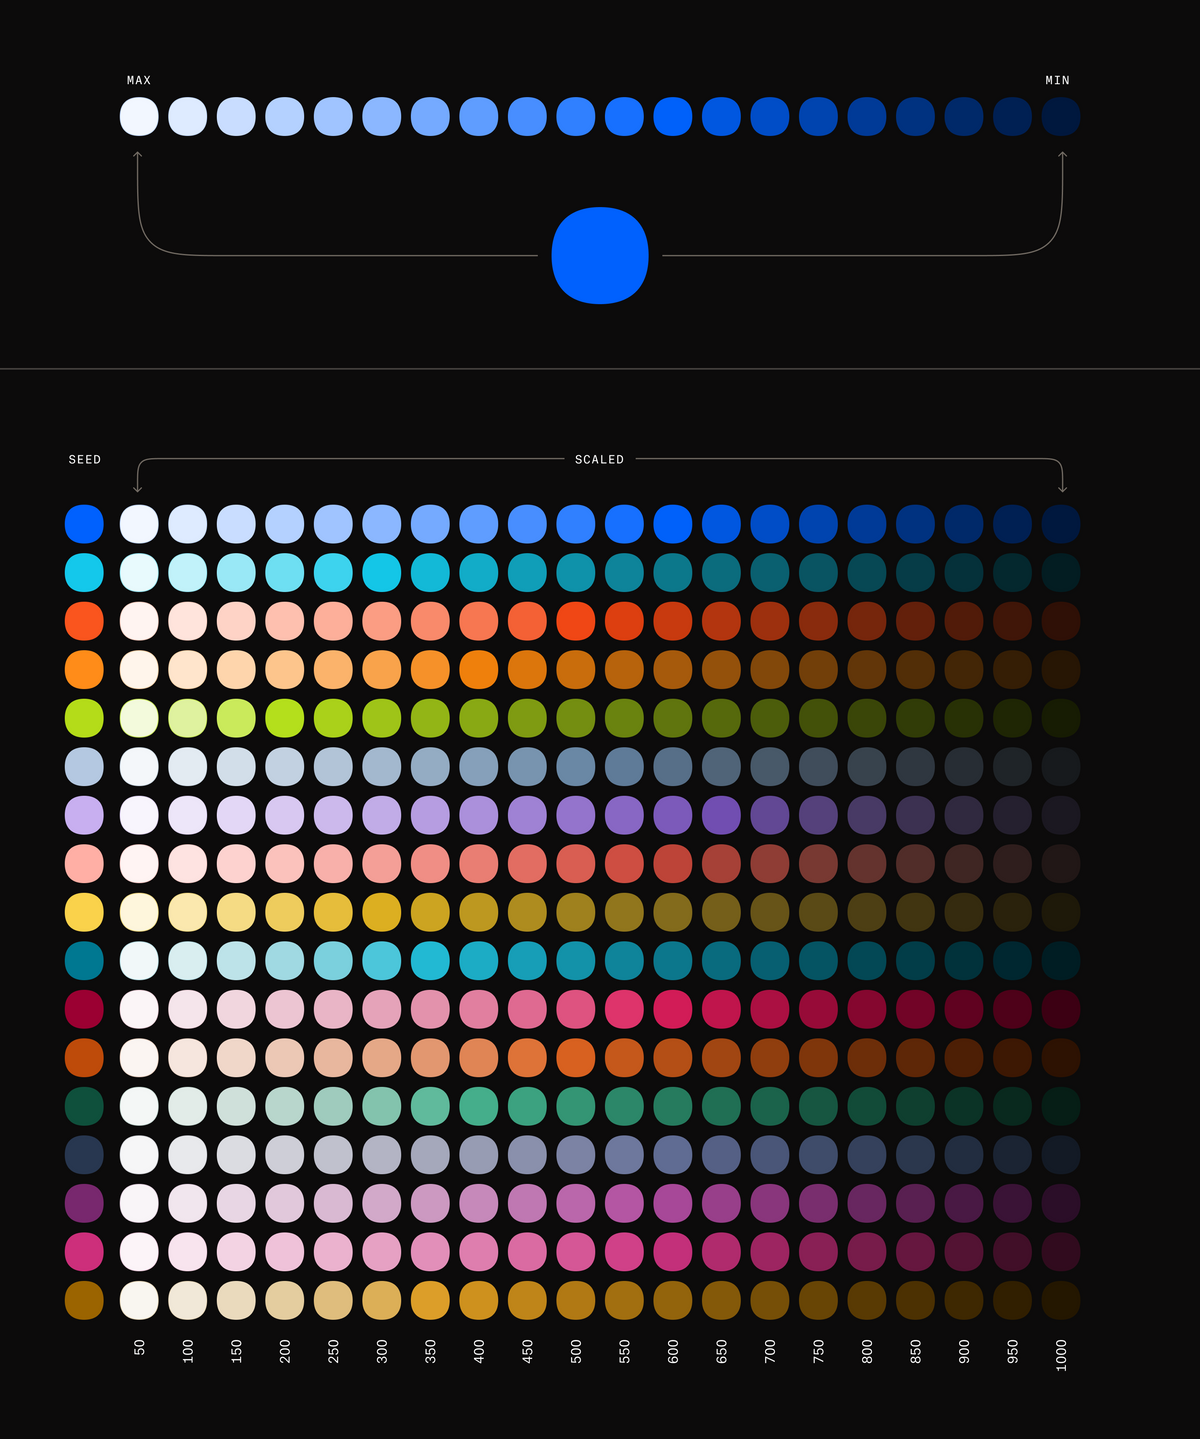 Scaled colors from Dropbox's VIS core colors